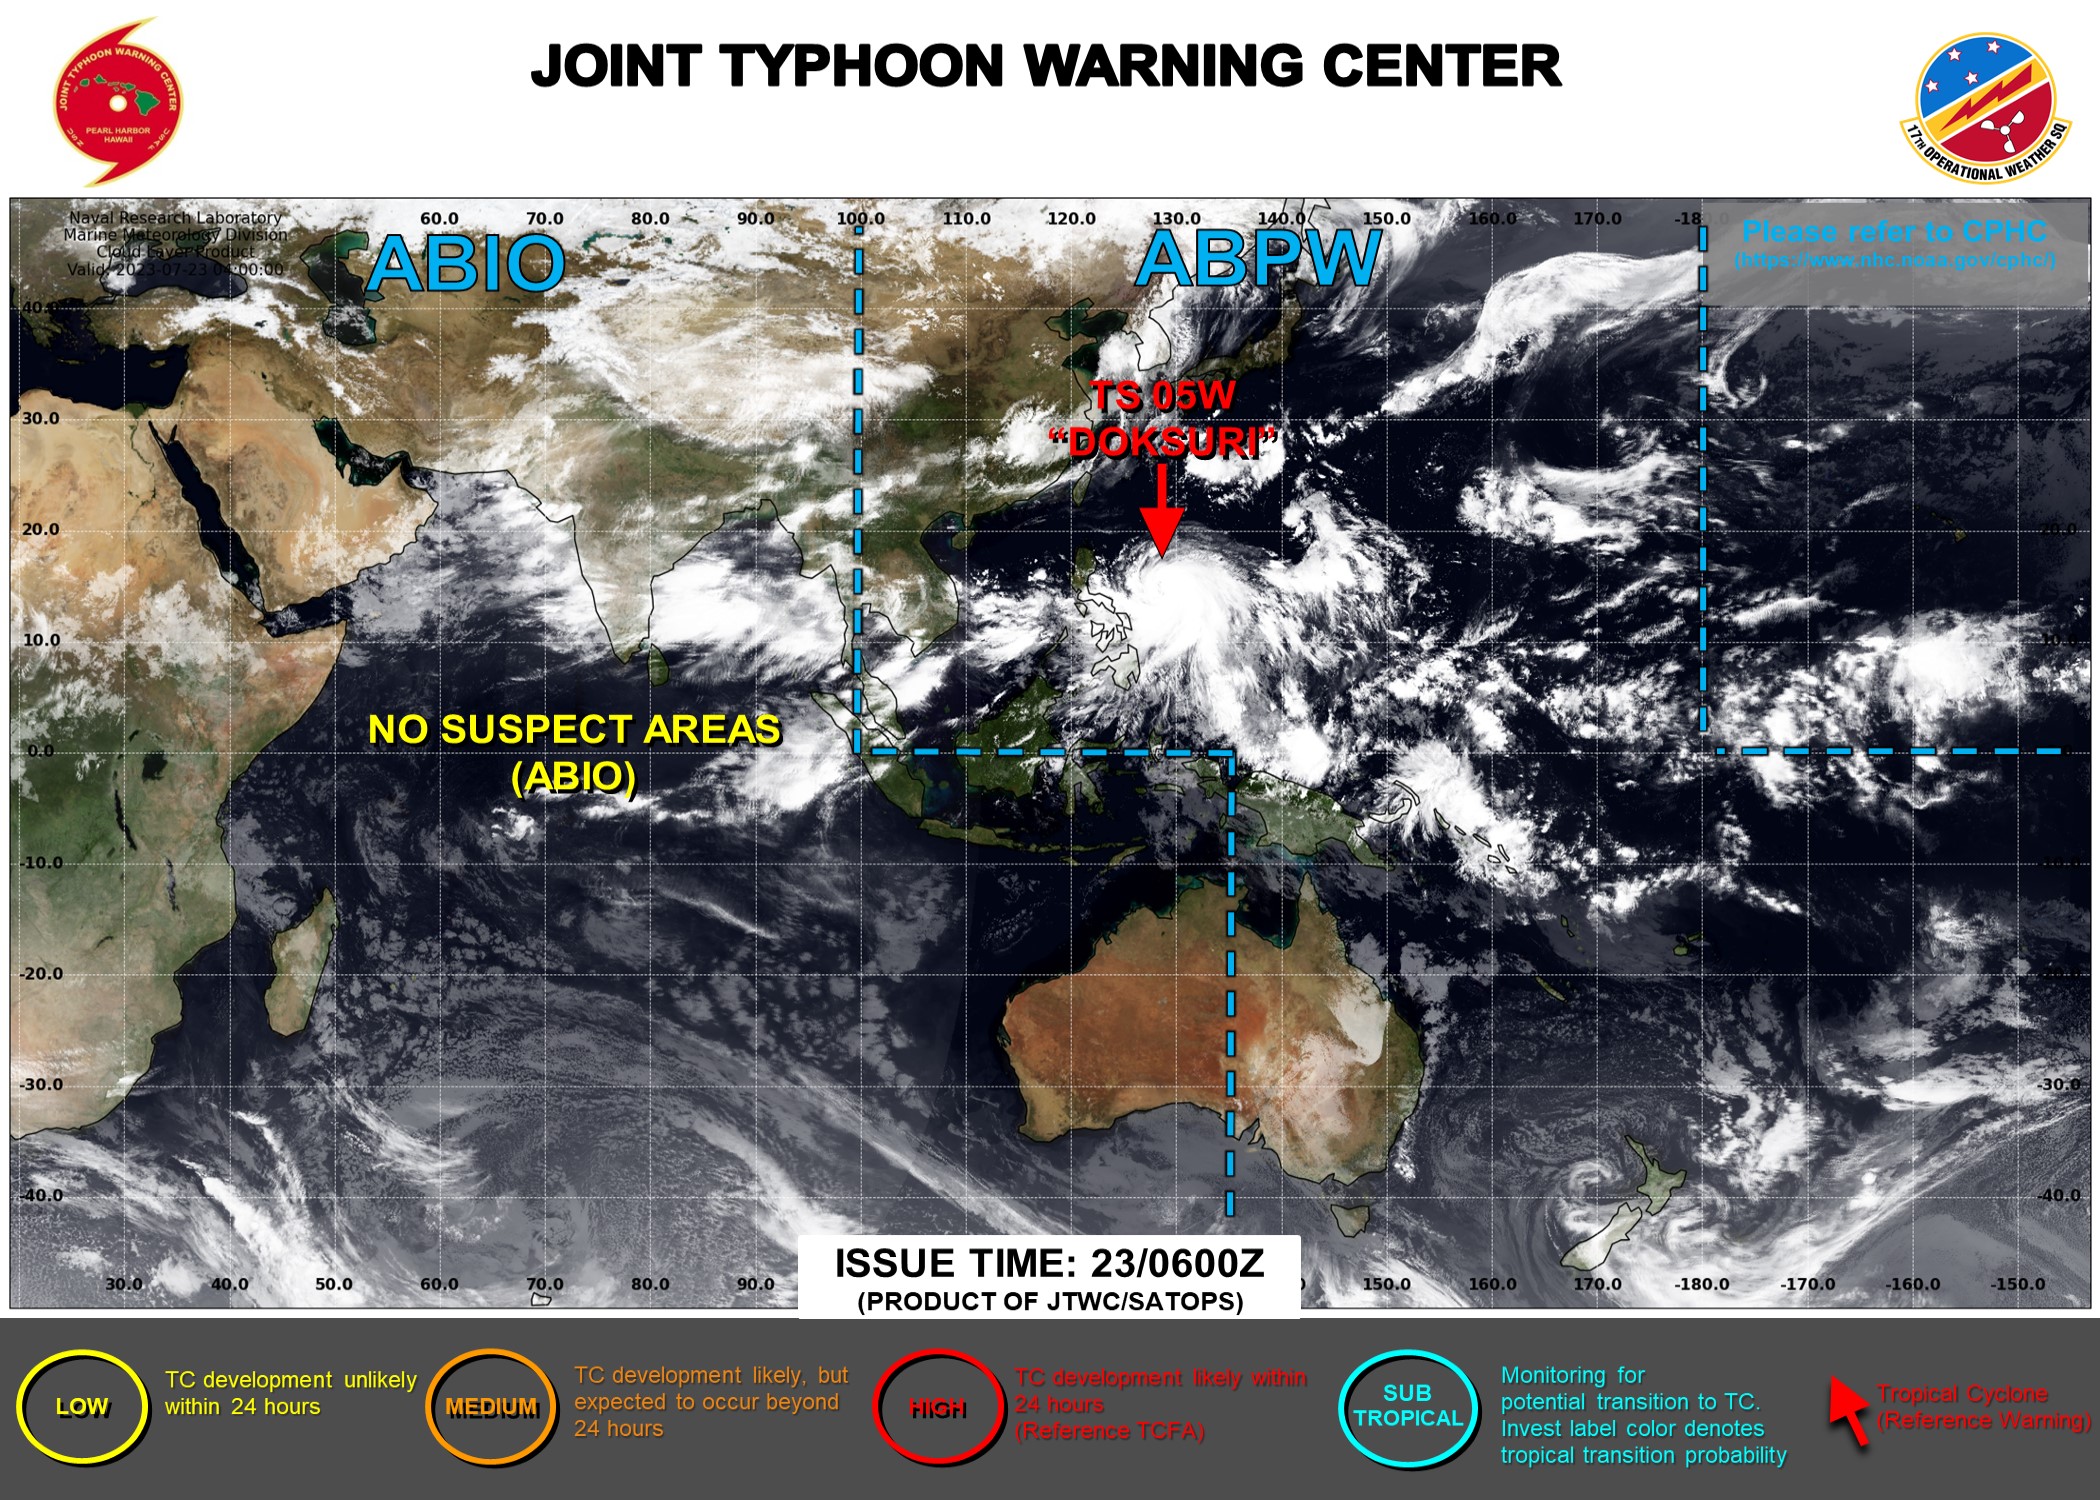 JTWC IS ISSUING 6HOURLY WARNINGS AND 3HOURLY SATELLITE BULLETINS ON TY 05W(DOKSURI).